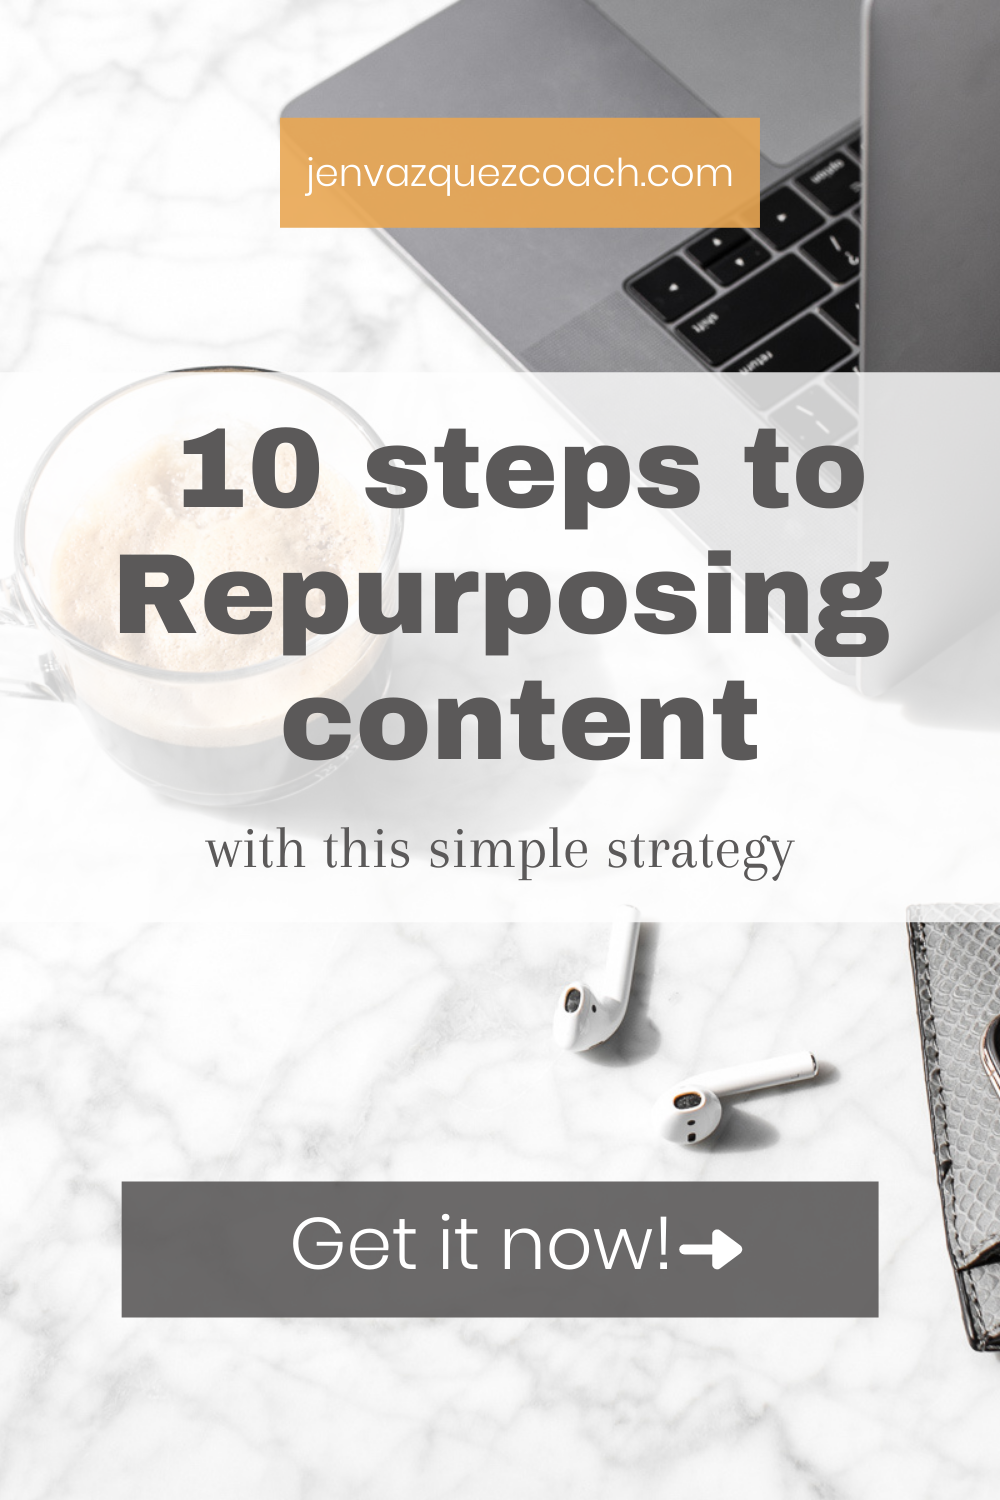 10 steps to Repurposing content with this simple strategy